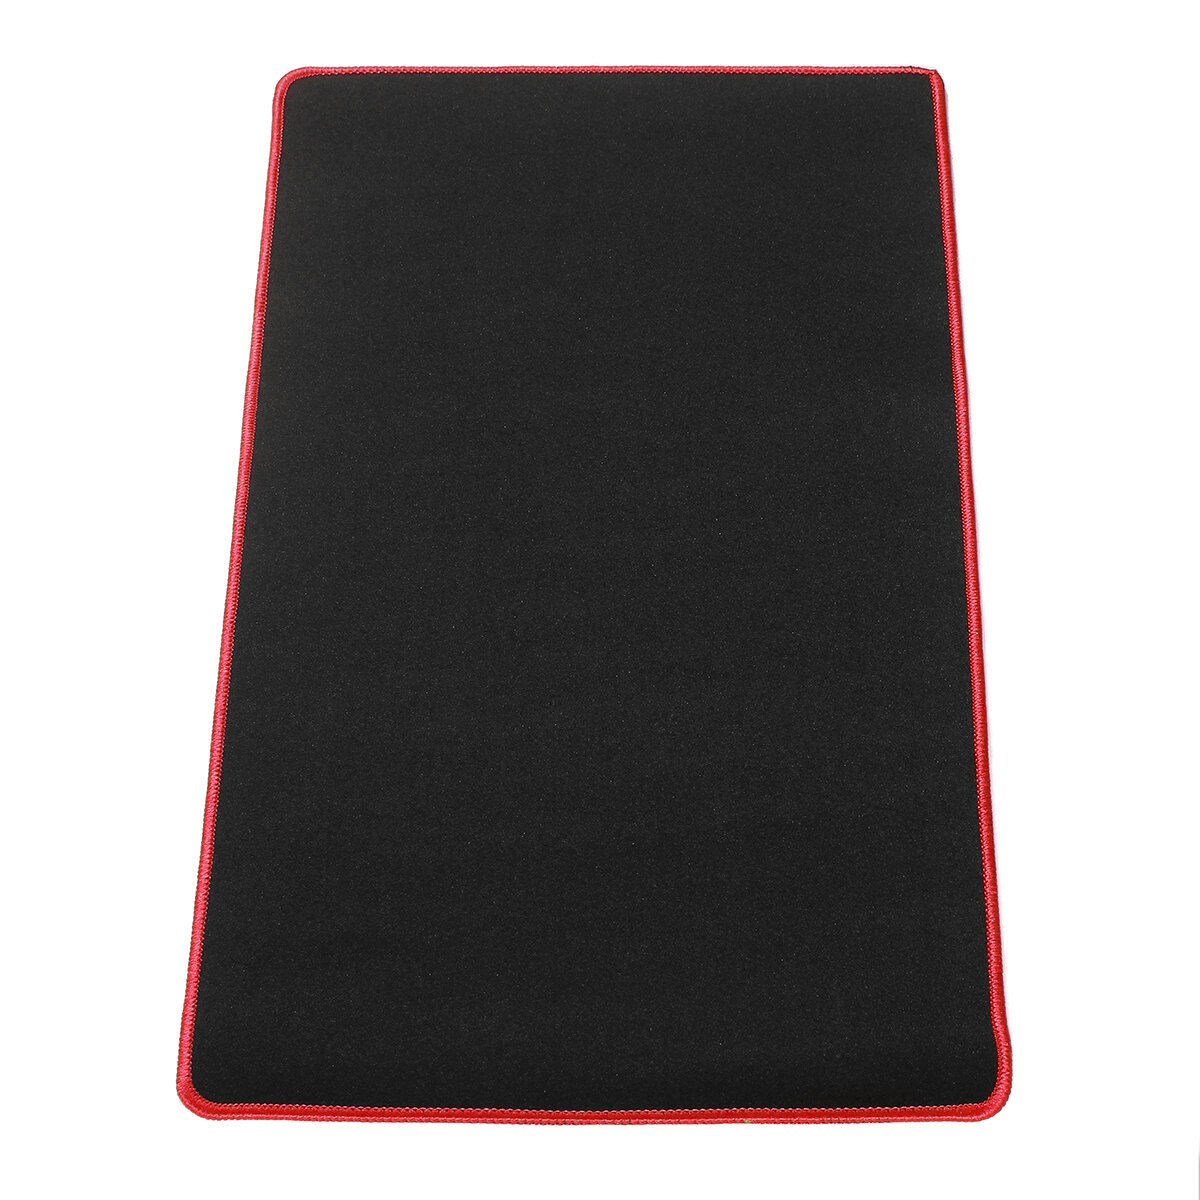 Large Mouse Pad Non-slip Rubber Gaming Keyboard Pad Desktop Table Protective Mat for Home Office COD